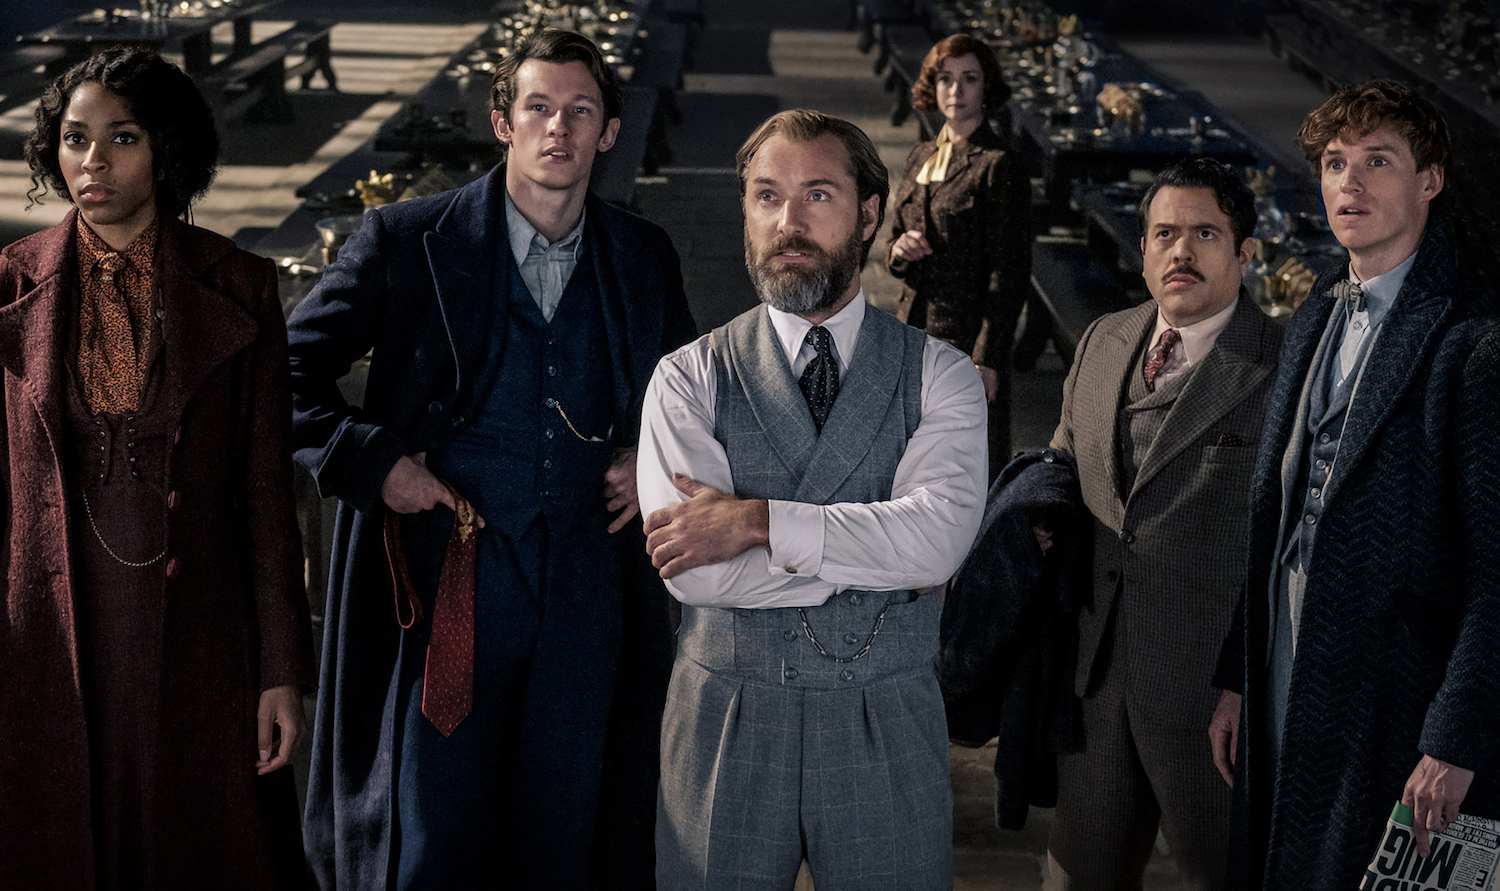 The Trailer for “Fantastic Beasts: The Secrets of Dumbledore” Is Here!